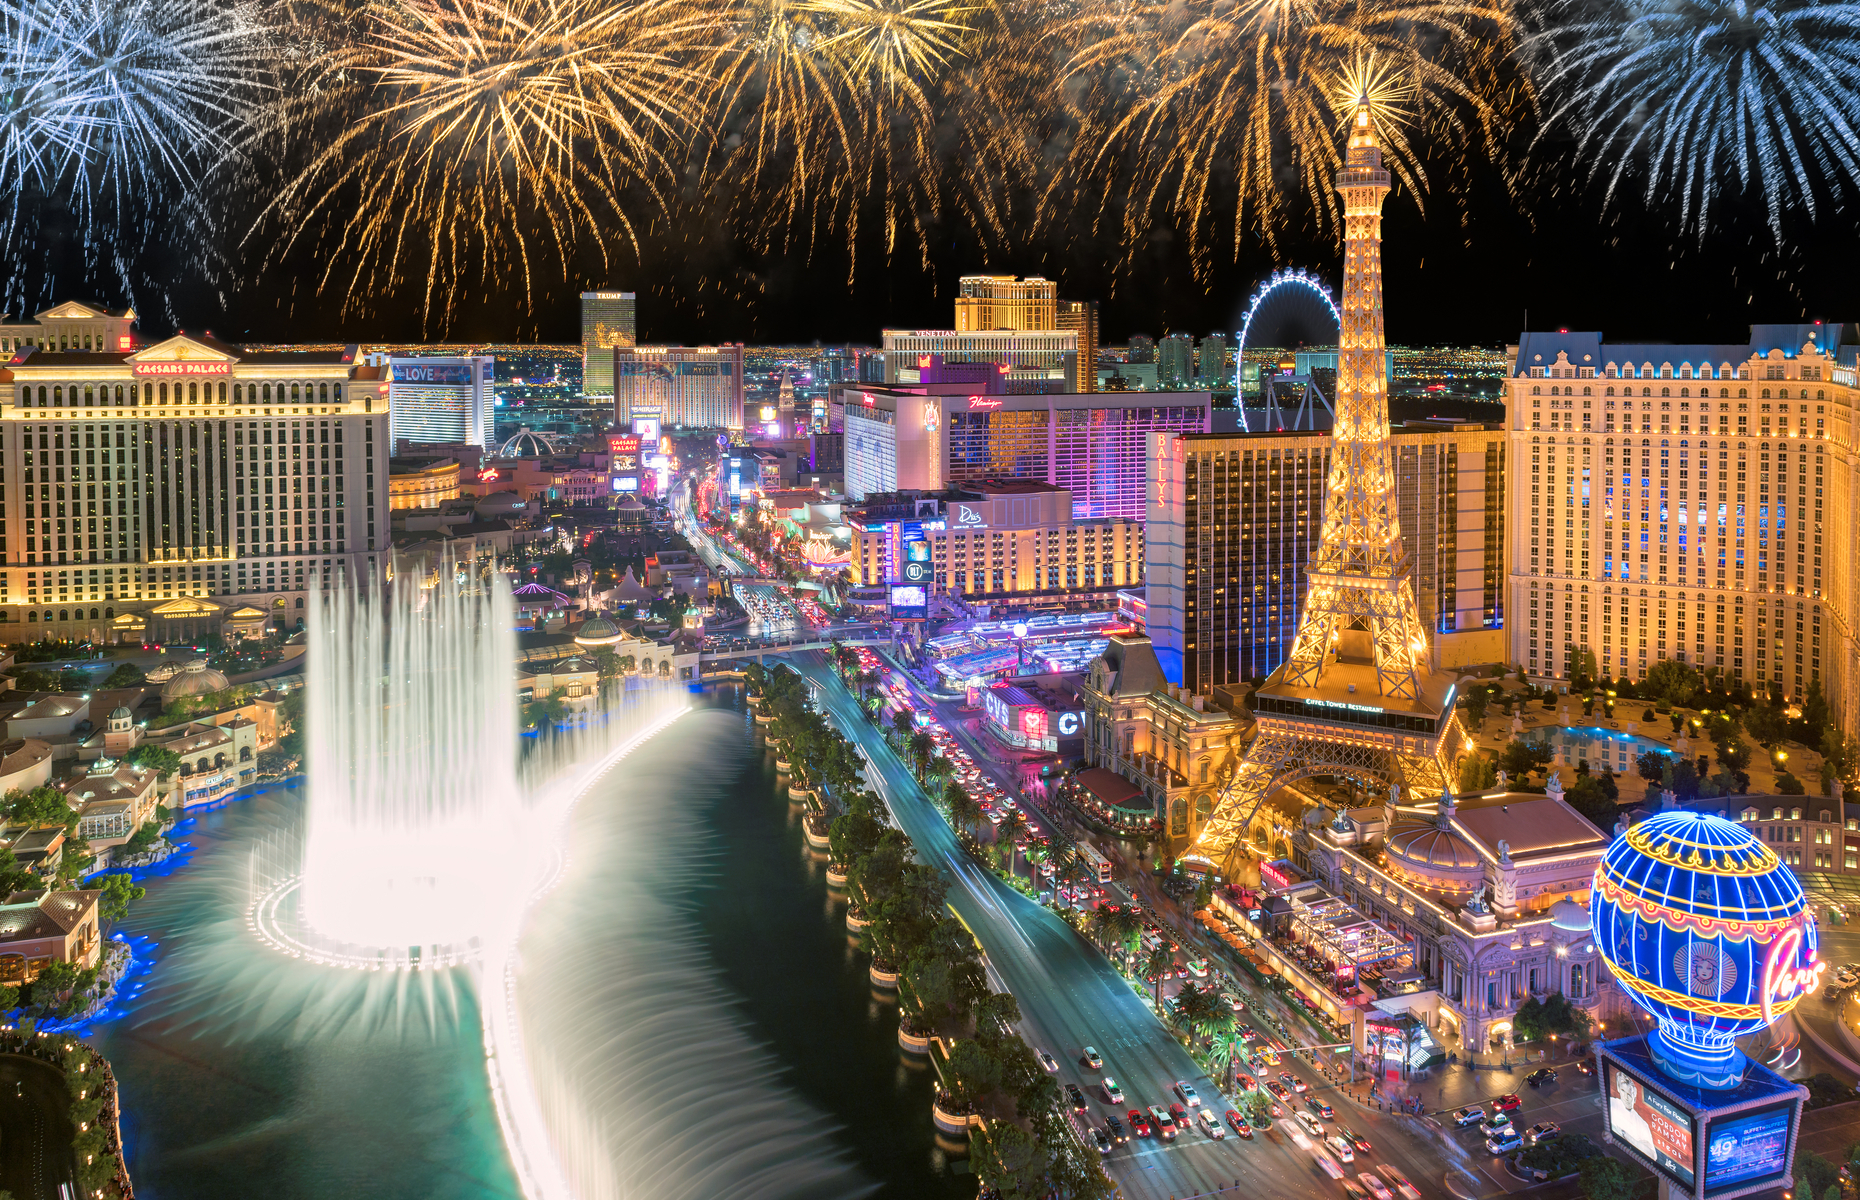 <p>If a quick, cost-friendly trip is more what you’re after, Las Vegas is the perfect location. The <a href="https://www.visitlasvegas.com/experience/post/dollars-and-sense/">city</a> offers a number of hotels that offer great rooms for reasonable prices, low-cost eateries, and a number of free attractions for those who don’t prefer casinos and magic shows. If you avoid Adele’s residency (where tickets are going from $600 to $41,000—yes, you read that right) and know when to walk away from the blackjack table, you can make Las Vegas work on virtually any budget.</p>